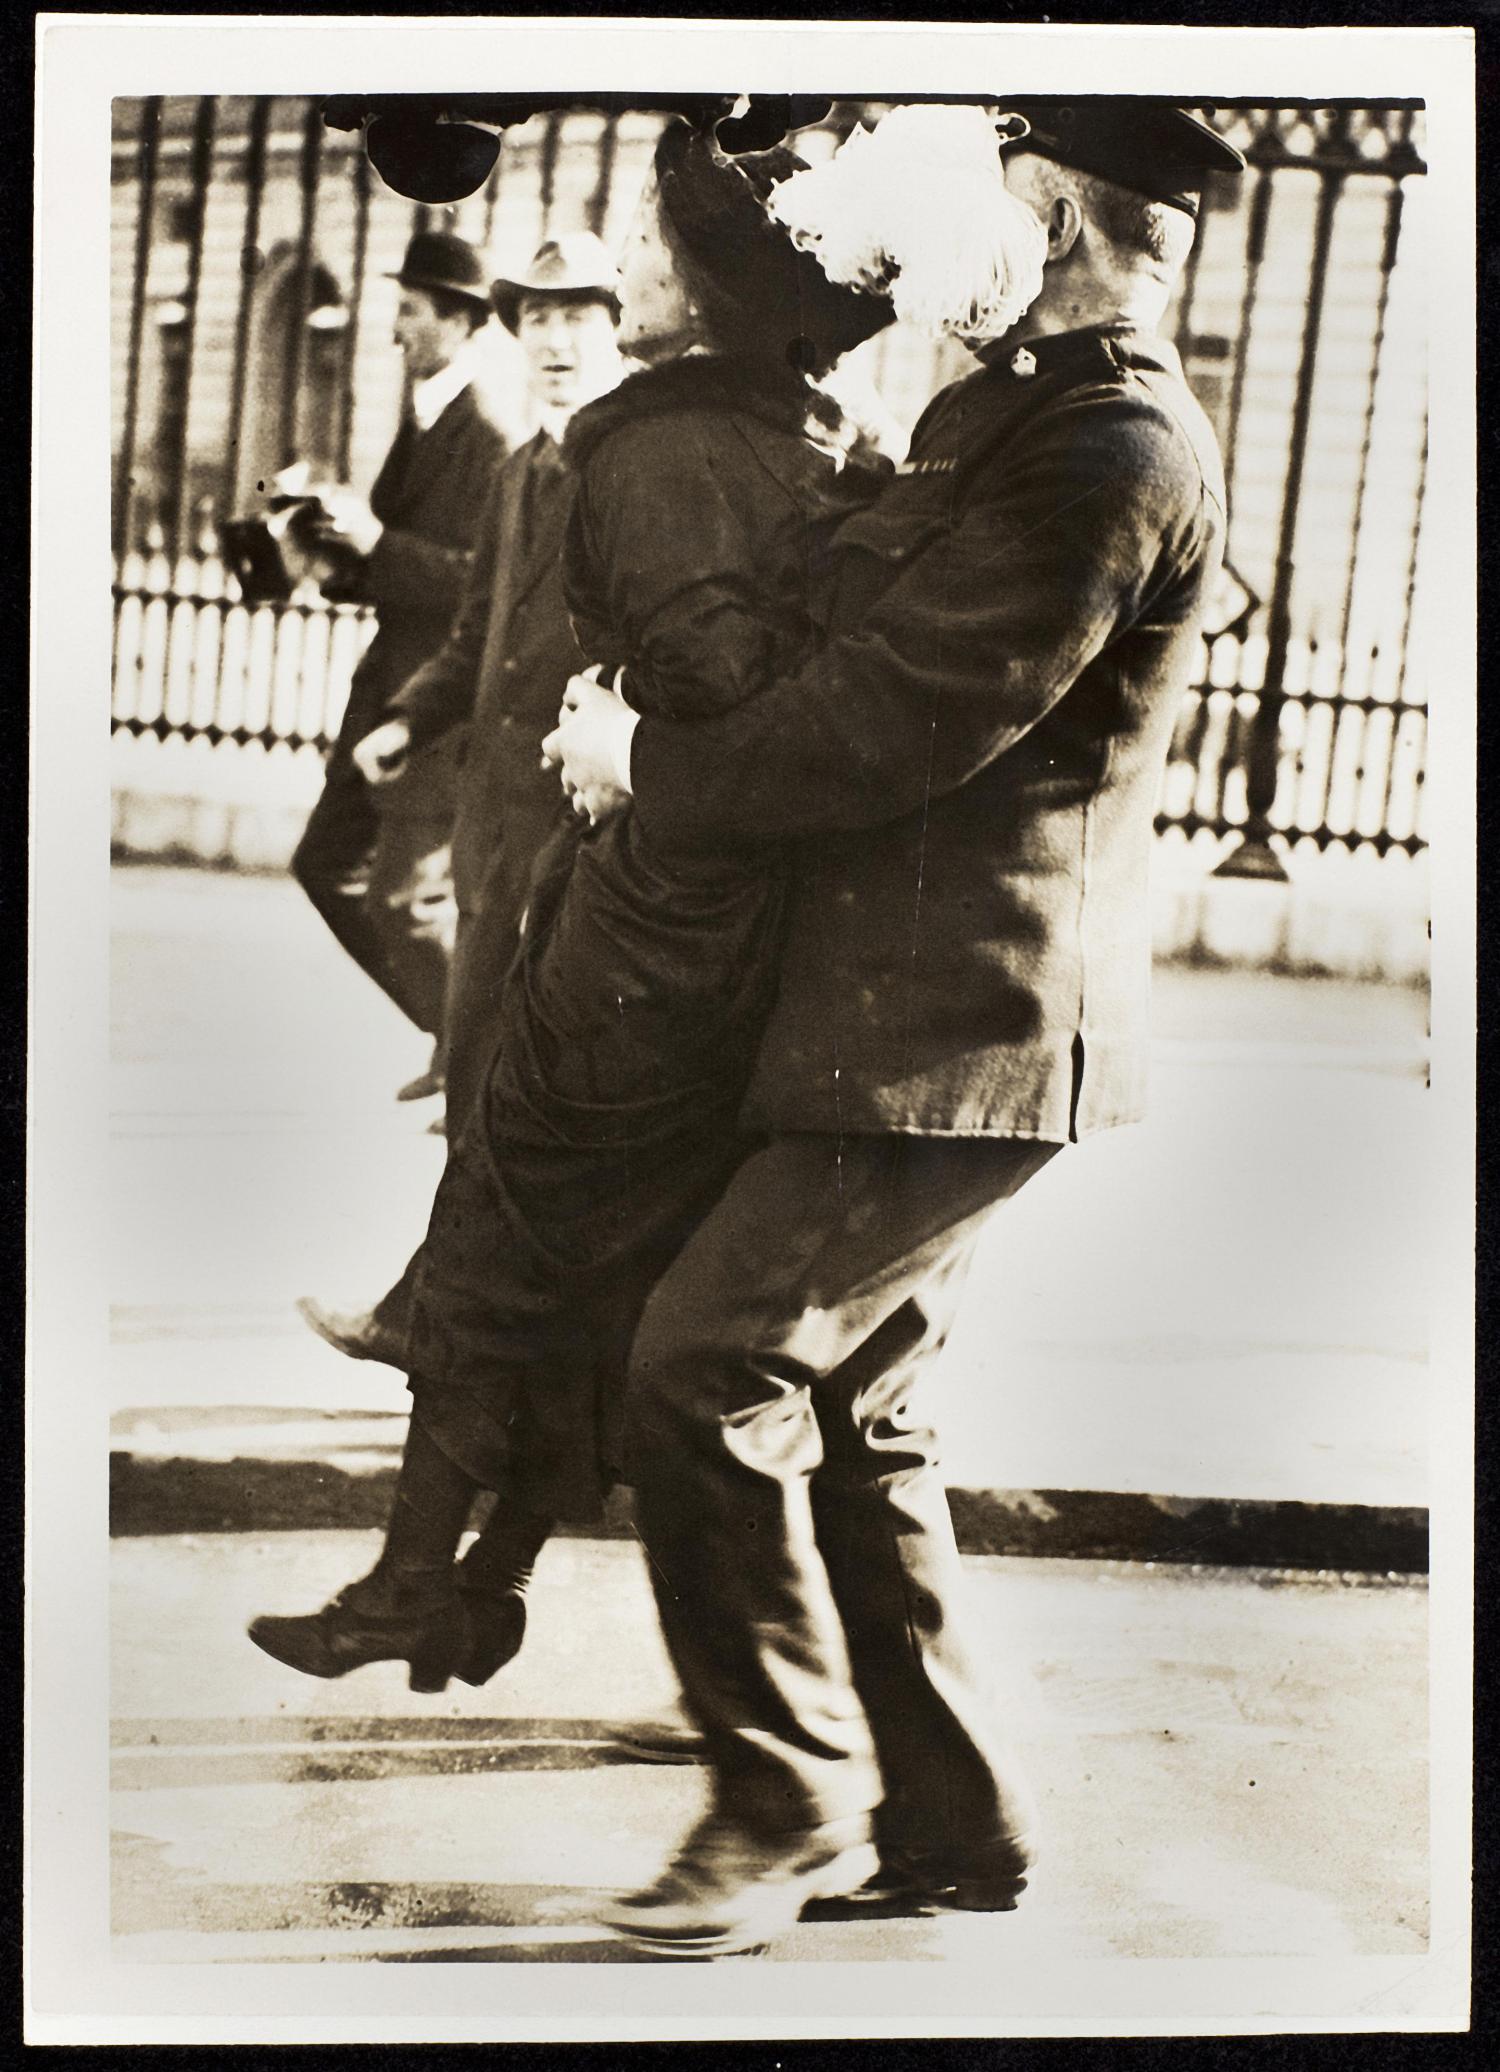 The leader of the Women's Suffragette movement, Mrs Emmeline Pankhurst is arrested by Superintendant Rolfe outside Buckingham Palace, London while trying to present a petition to HM King George V in May 1914.